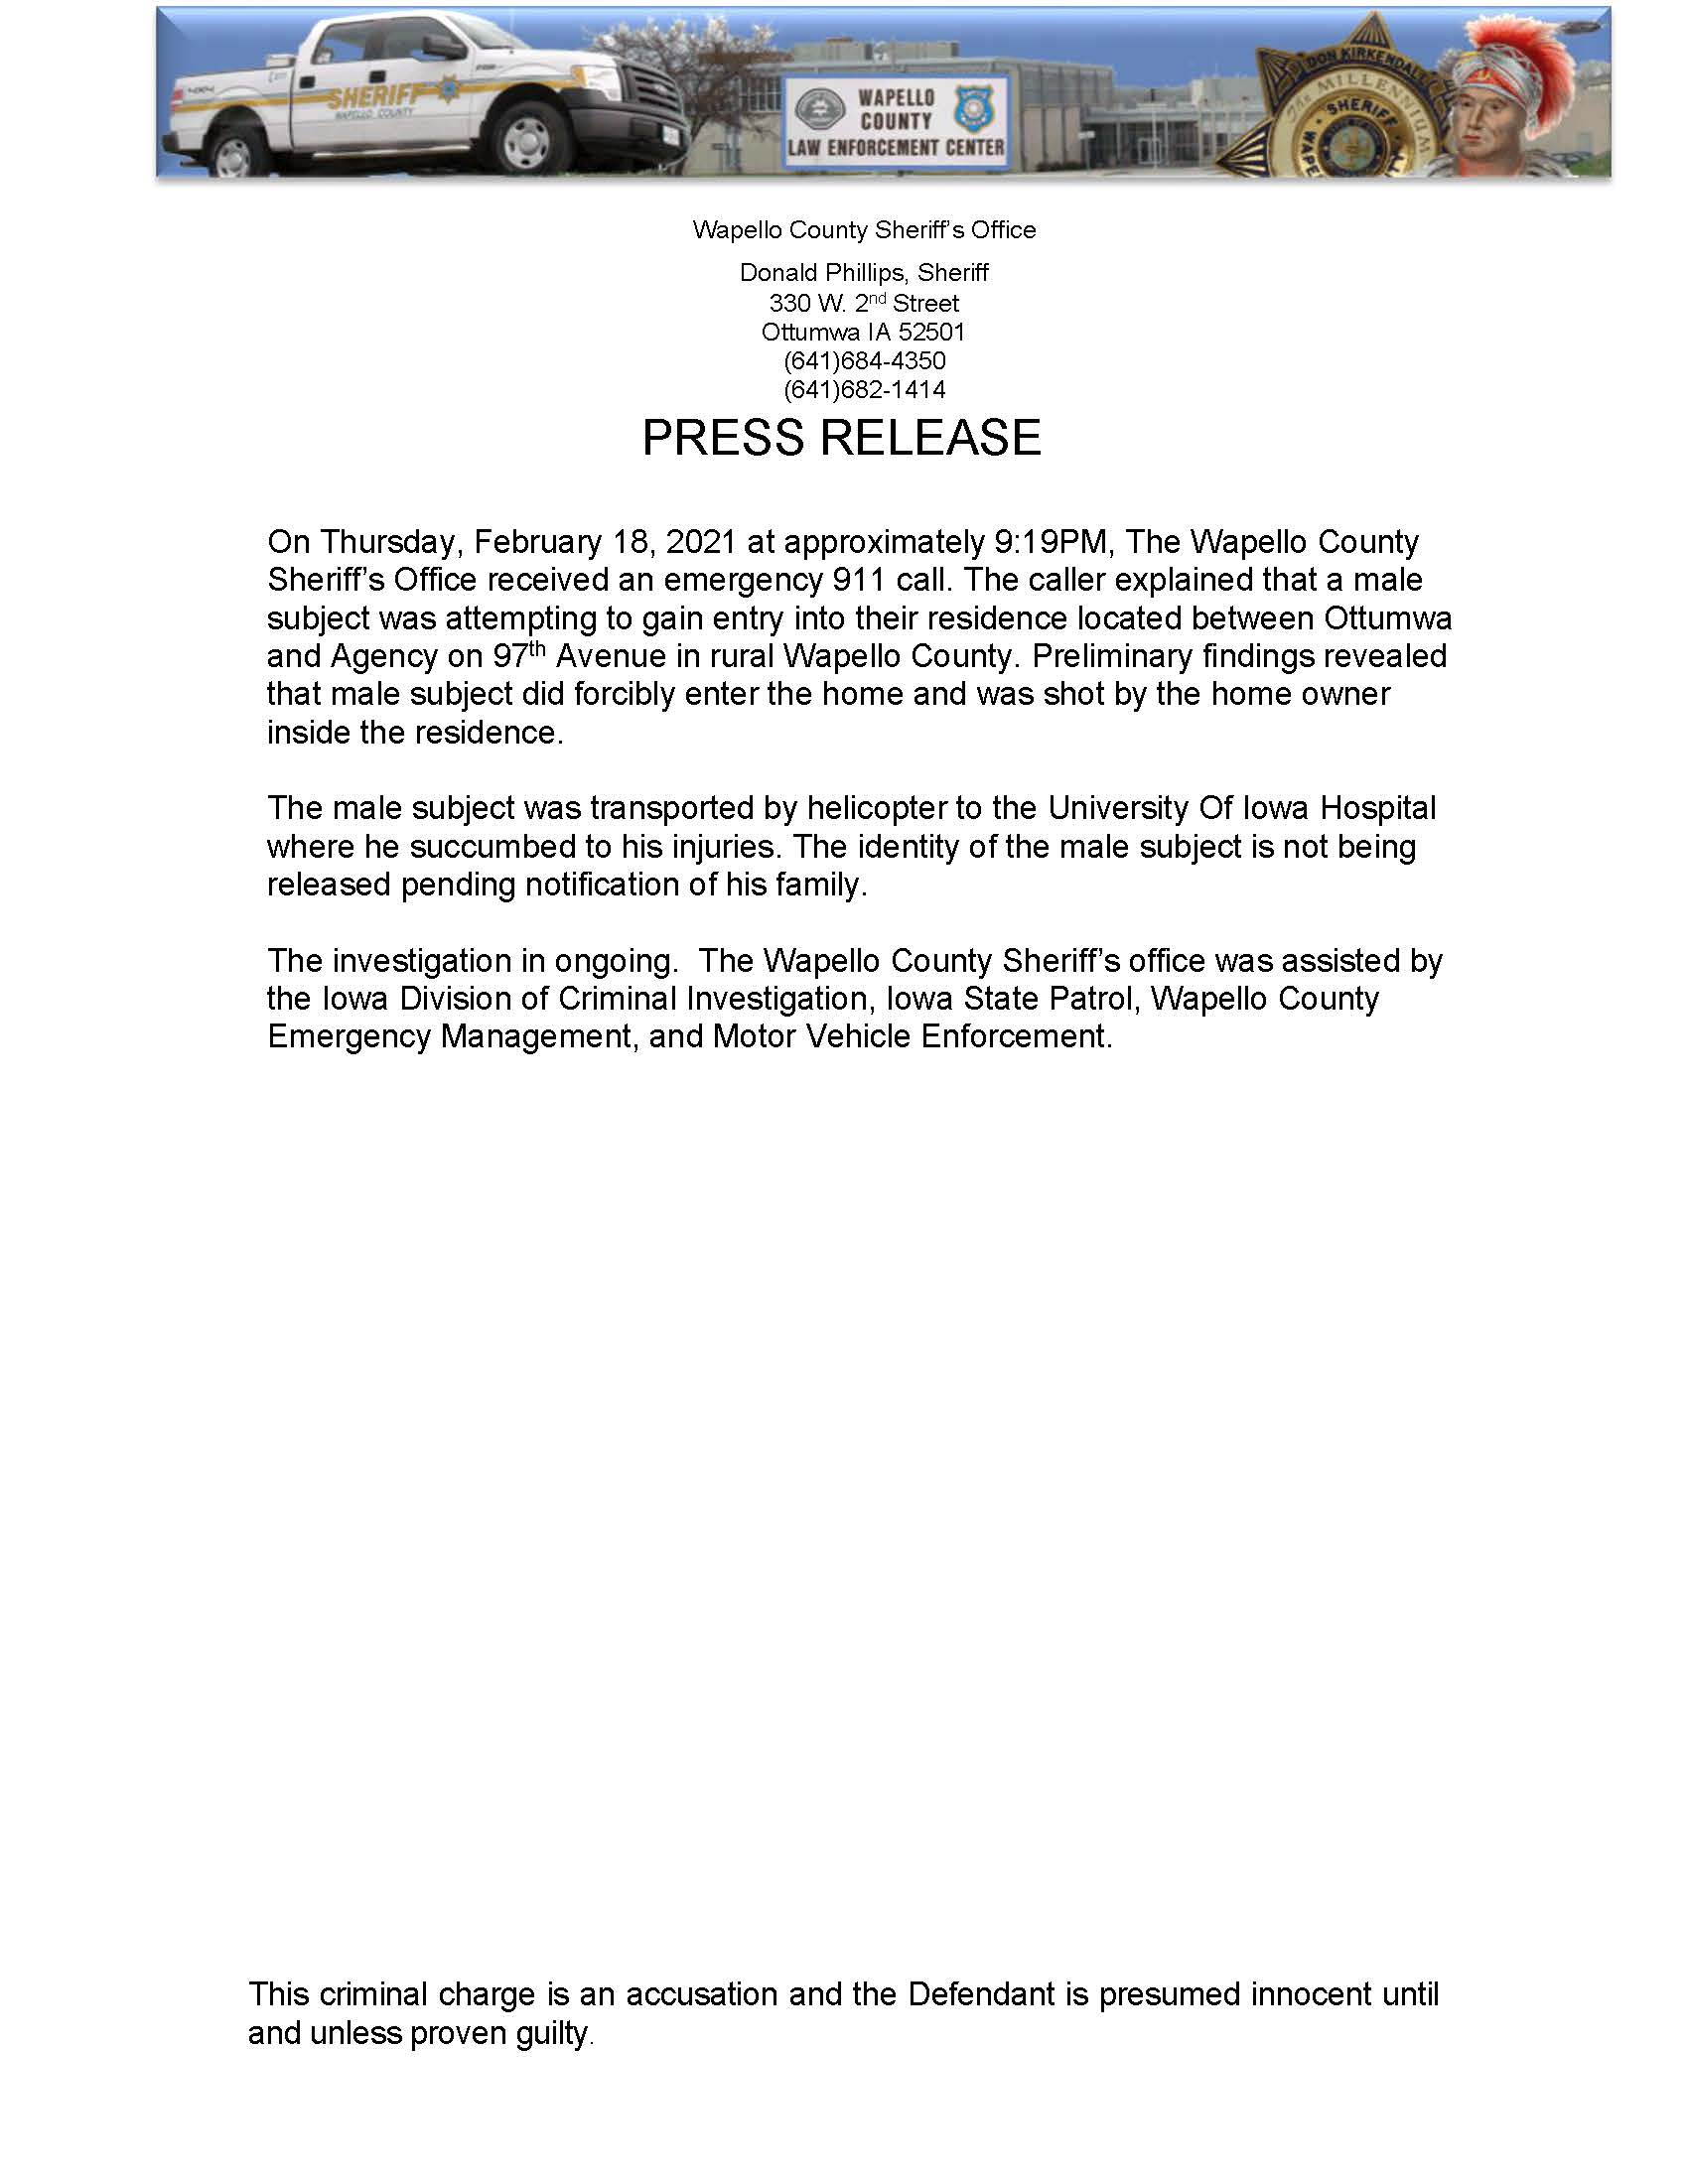 Link to Wapello press release